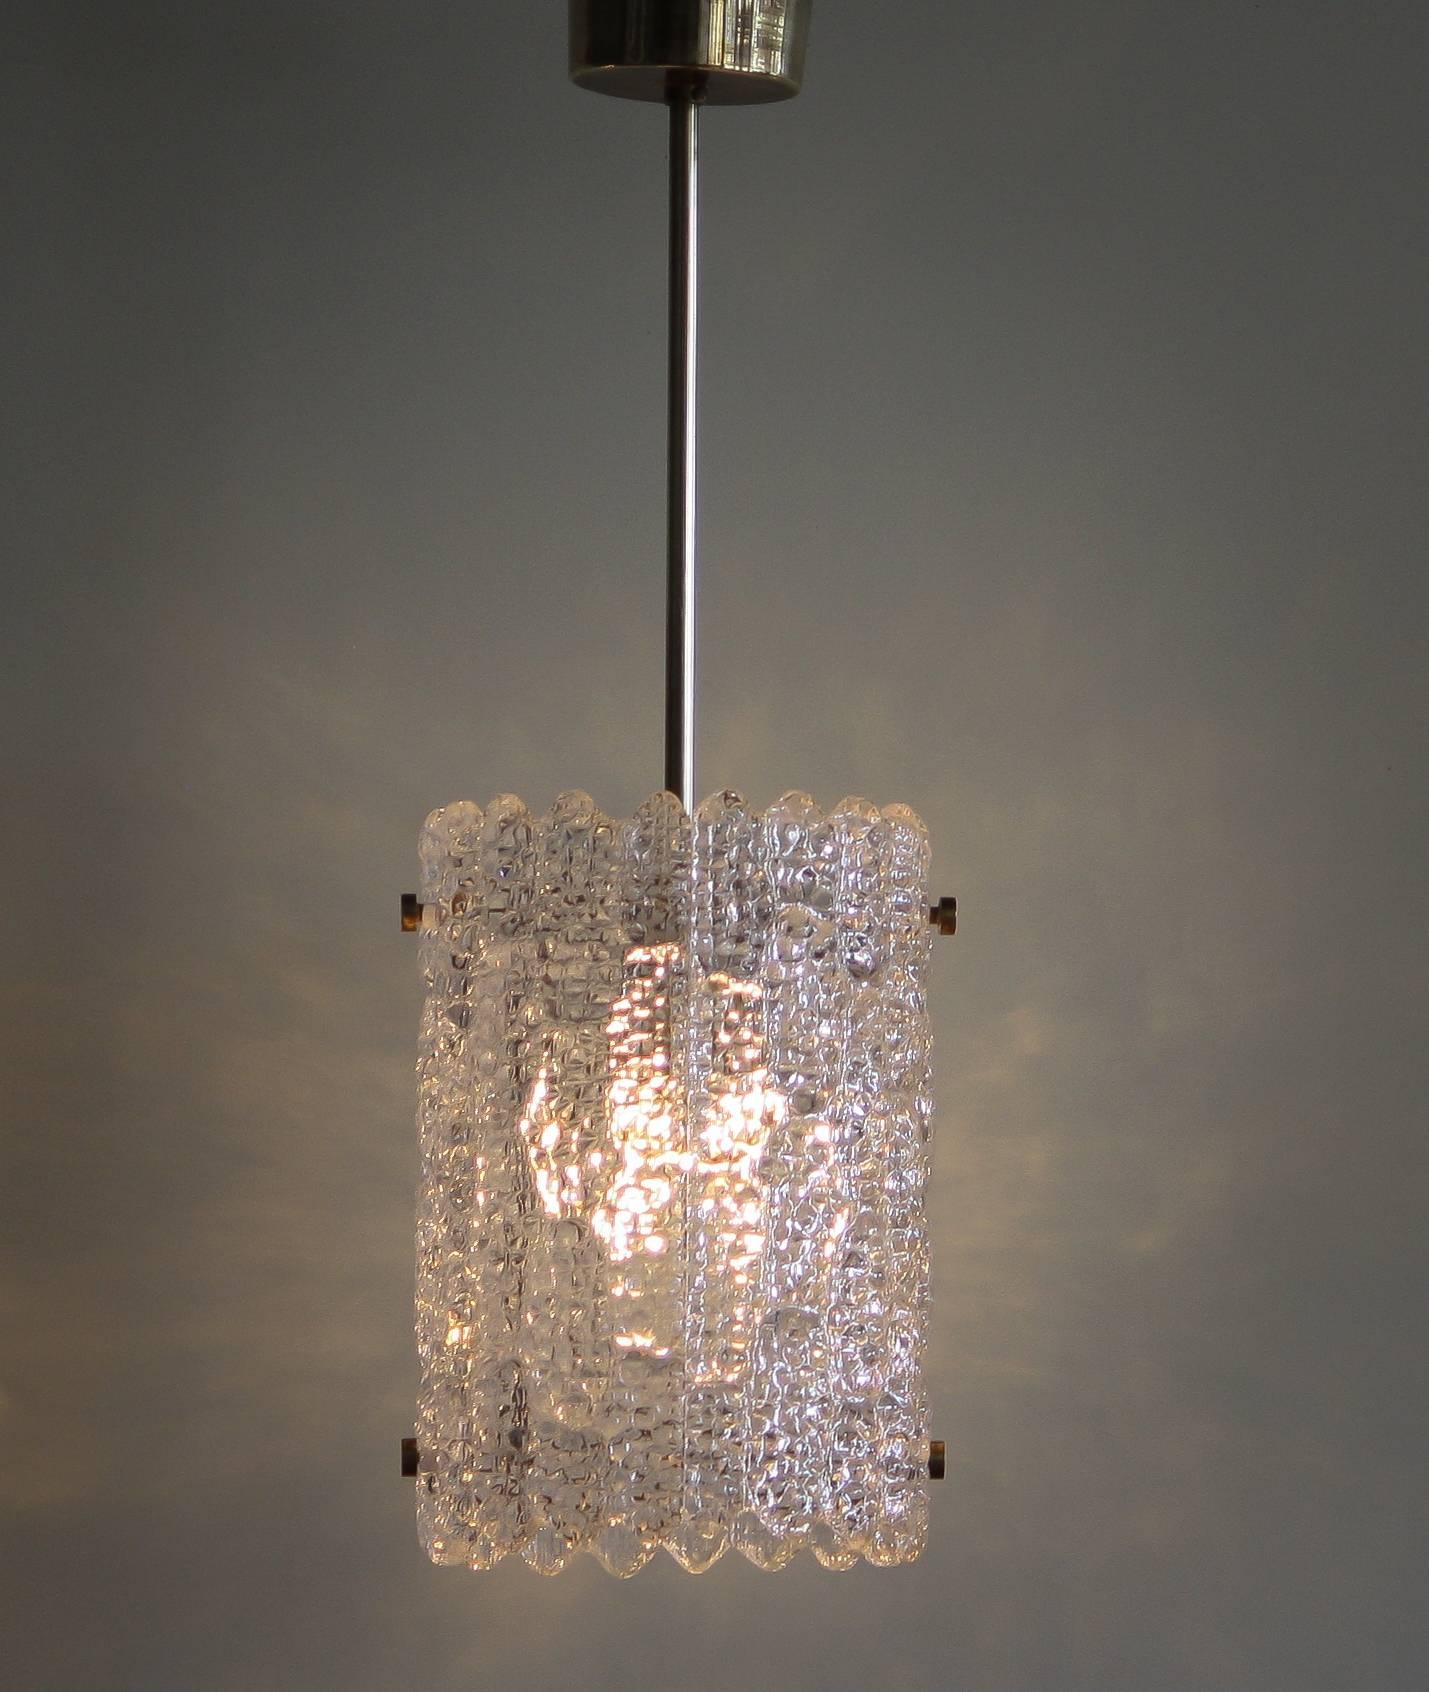 Beautiful pendant designed by Carl Fagerlund for Orrefors Sweden.
This lamp is made of brass with crystal glass and is in a very nice condition.
The textured glass reflects a wonderful light.
Period 1960s
Dimensions : H. 25 cm , ø.18 cm.